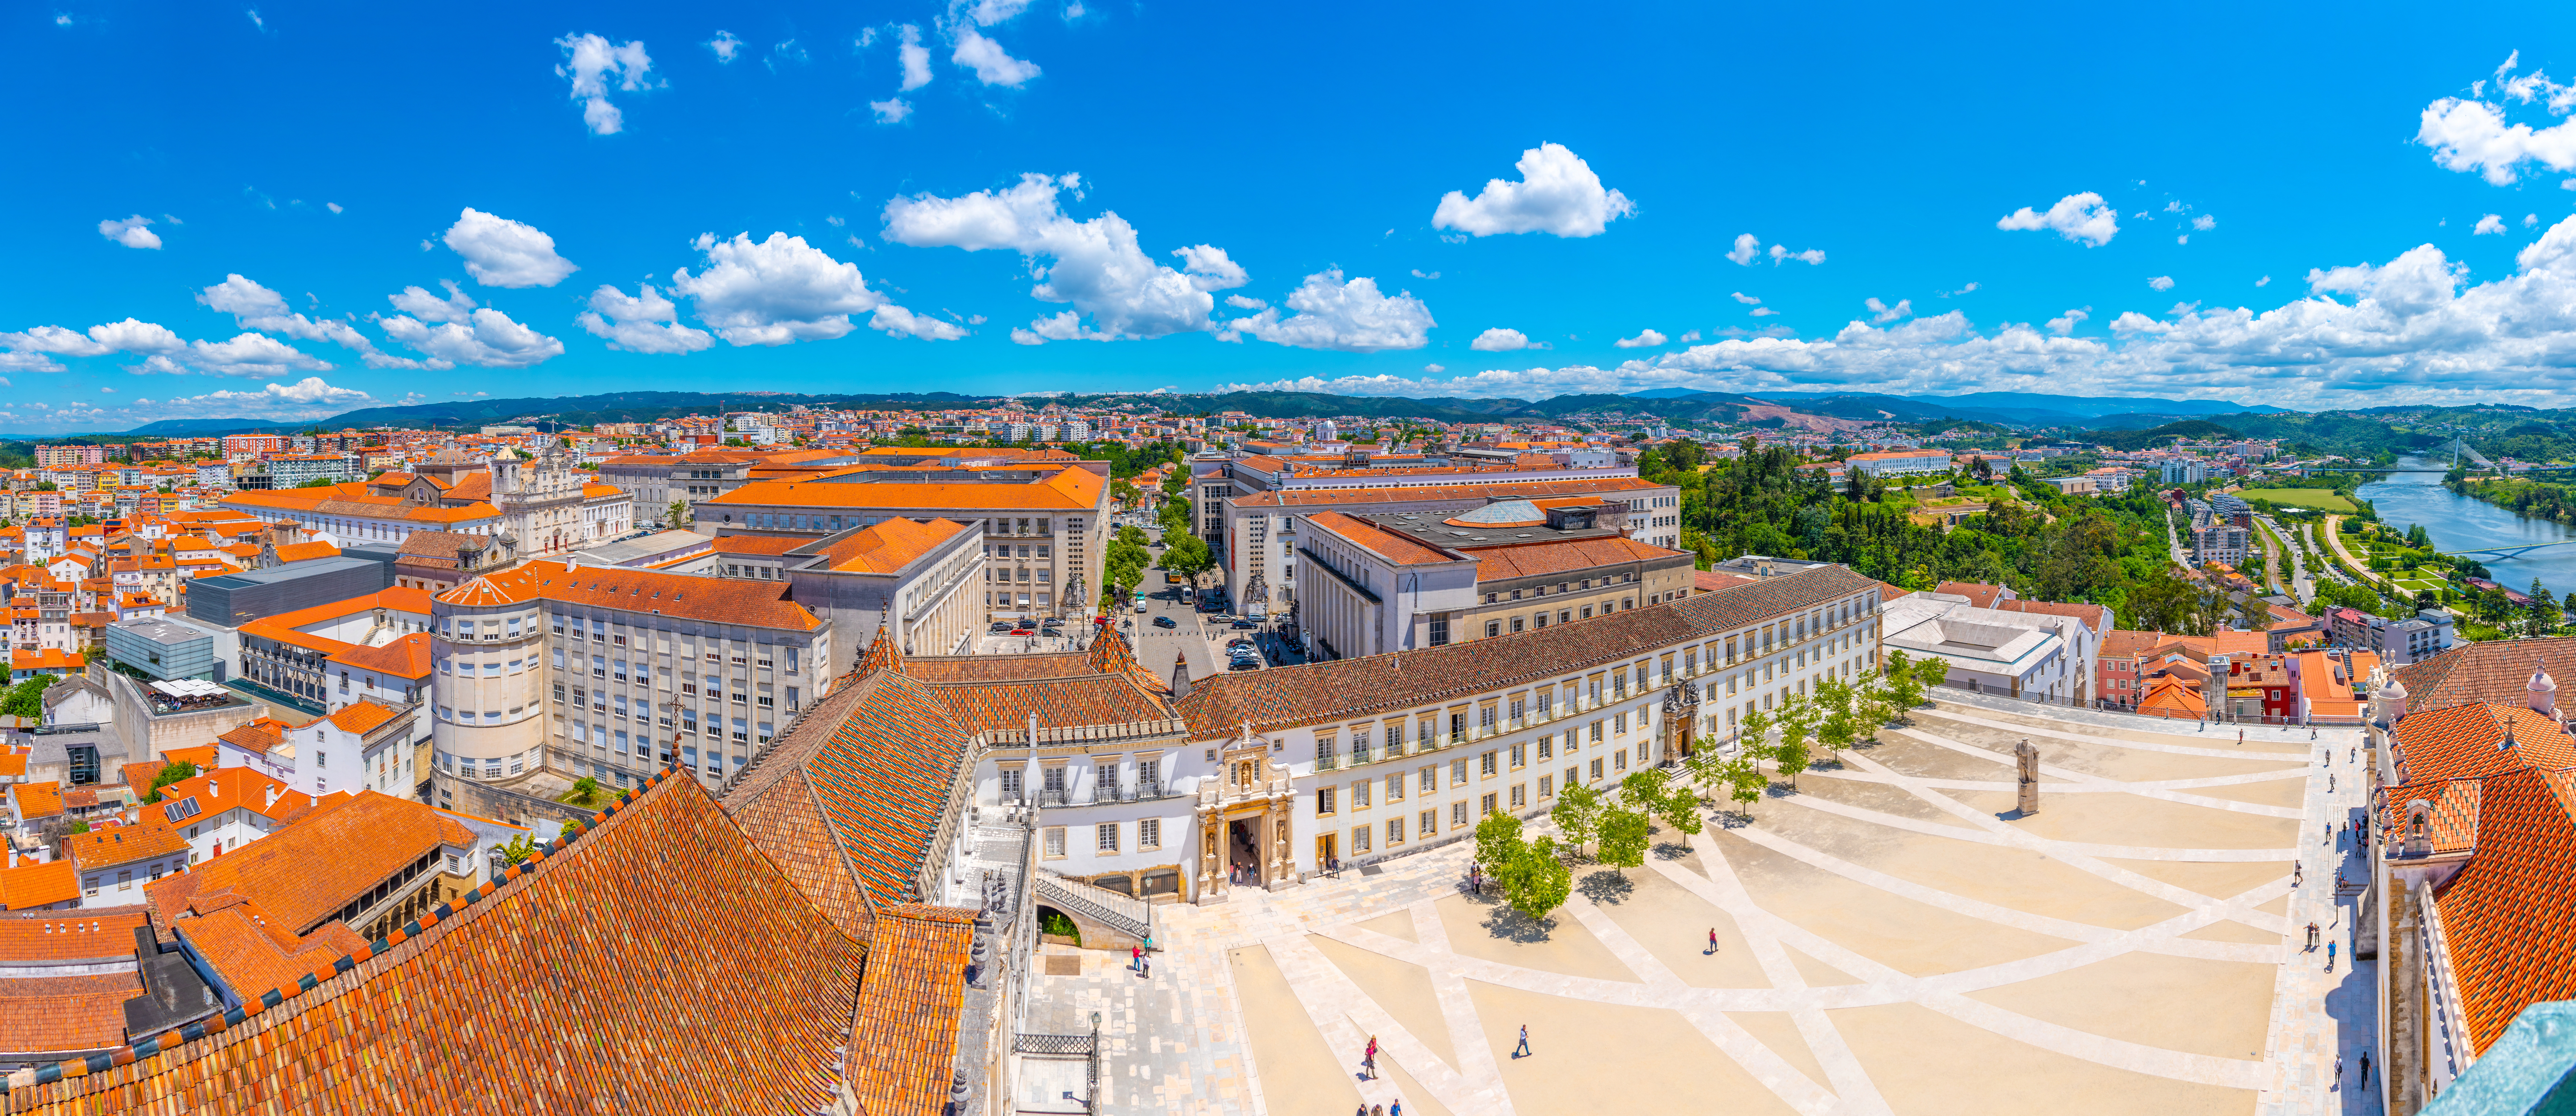 Places to visit in Portugal-Coimbra-University